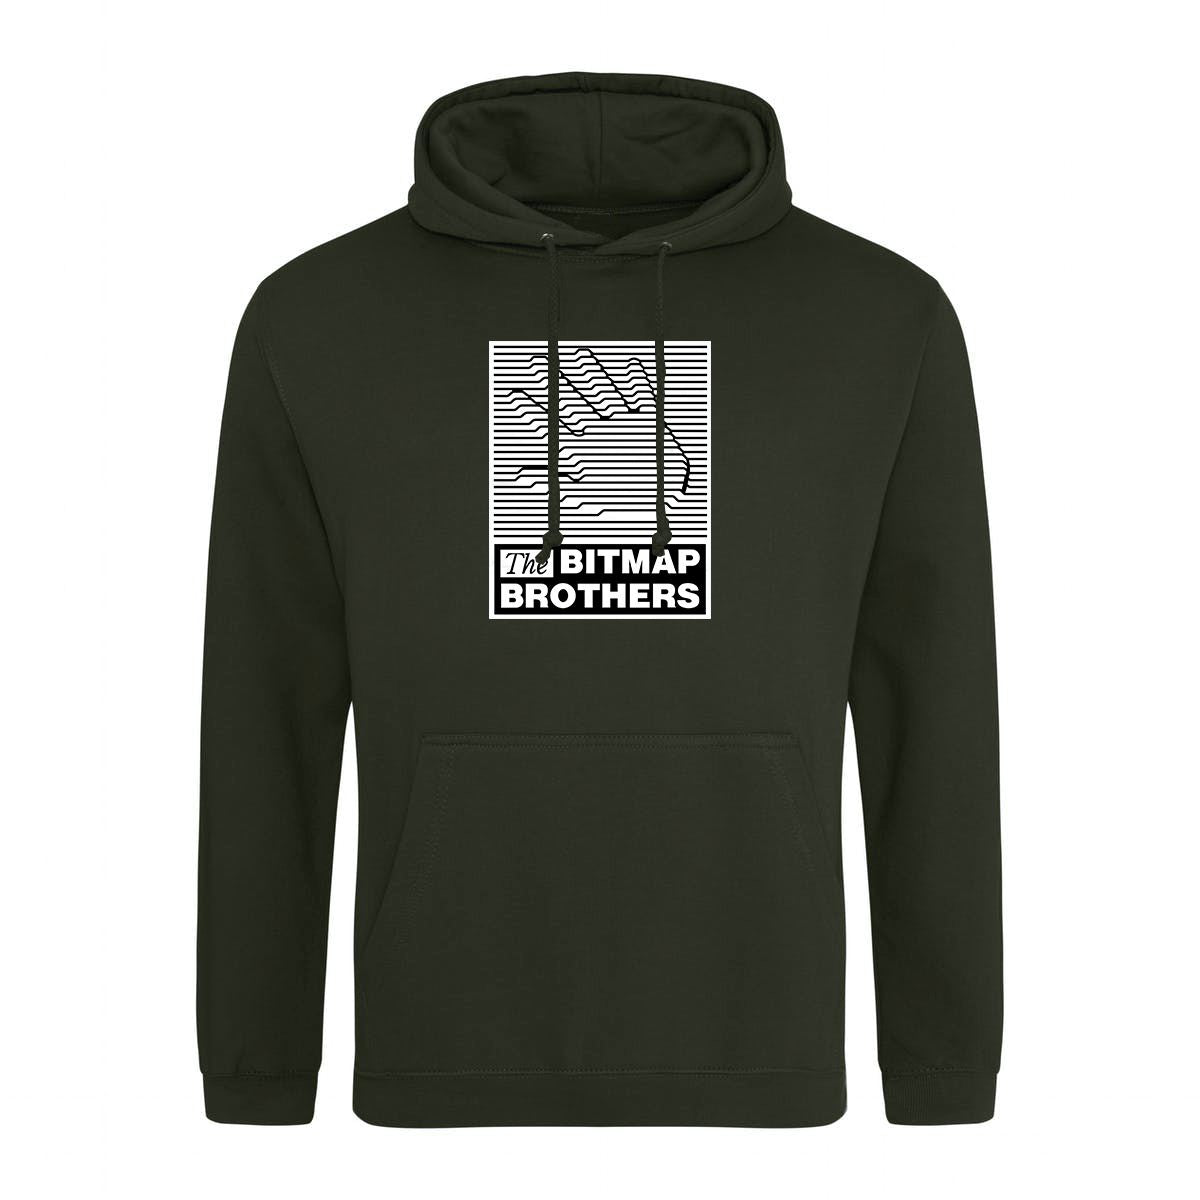 Bitmap Brothers Chest Logo Retro Gaming Hoodie Hoodie Seven Squared Small 36" Chest Combat Green 